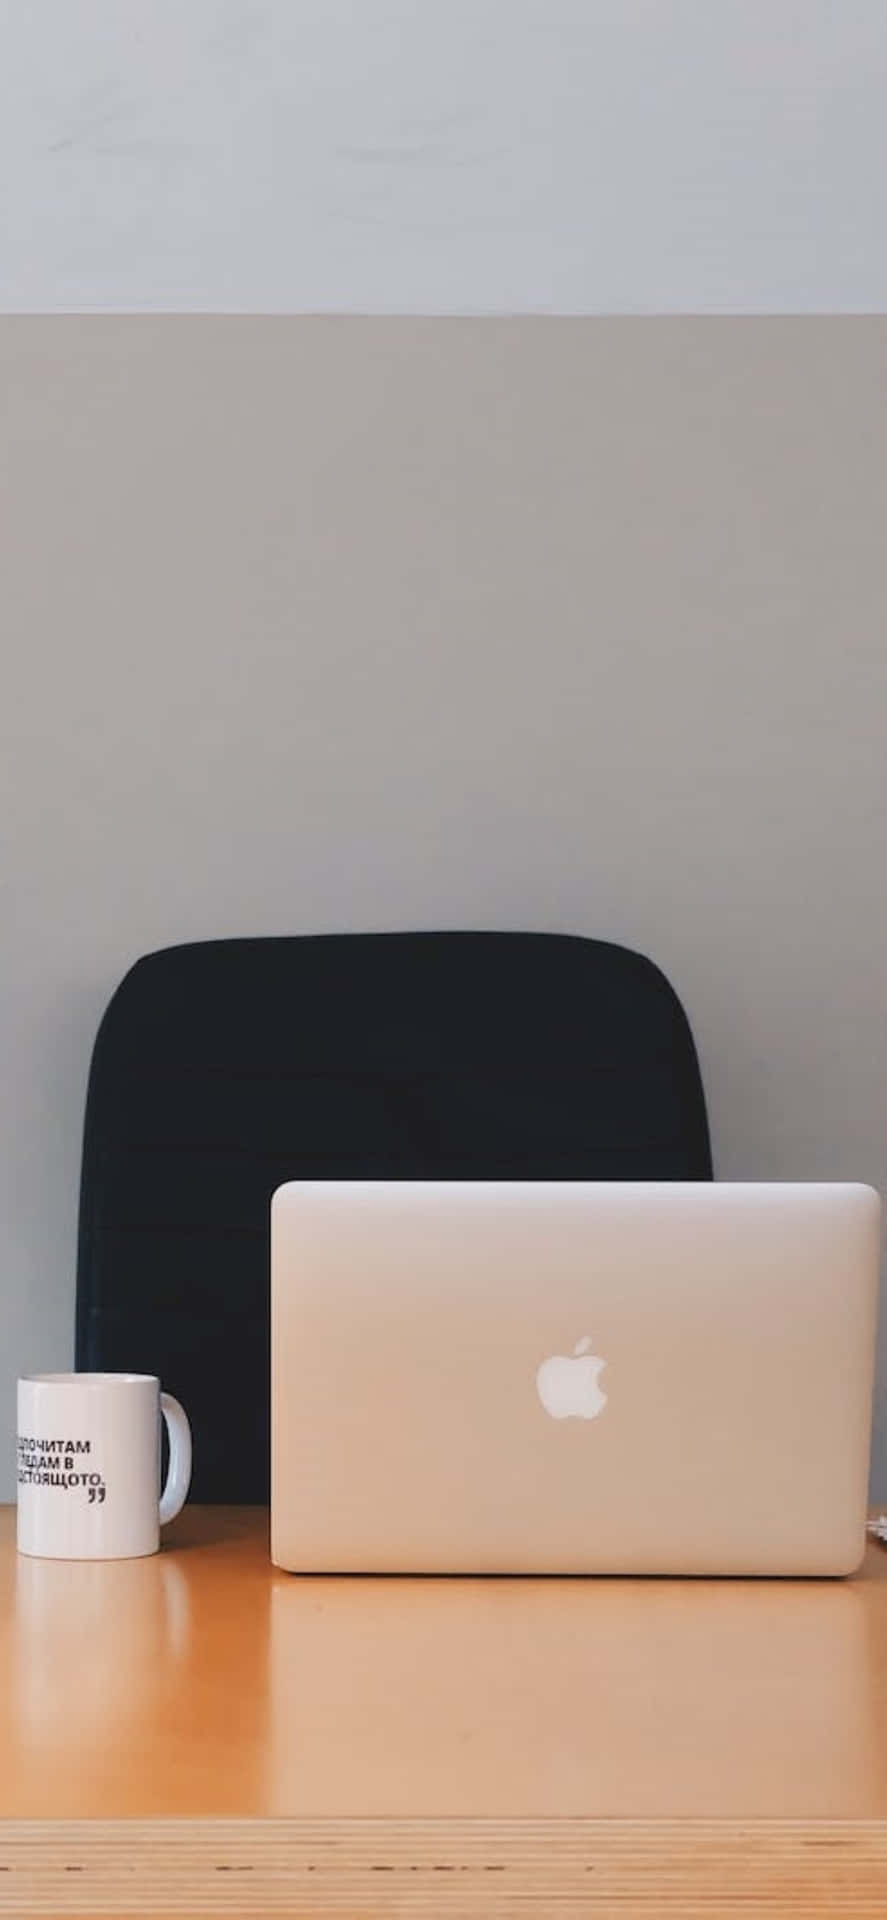 Iphone X Desk Background Wooden Desk With A Laptop And Cup